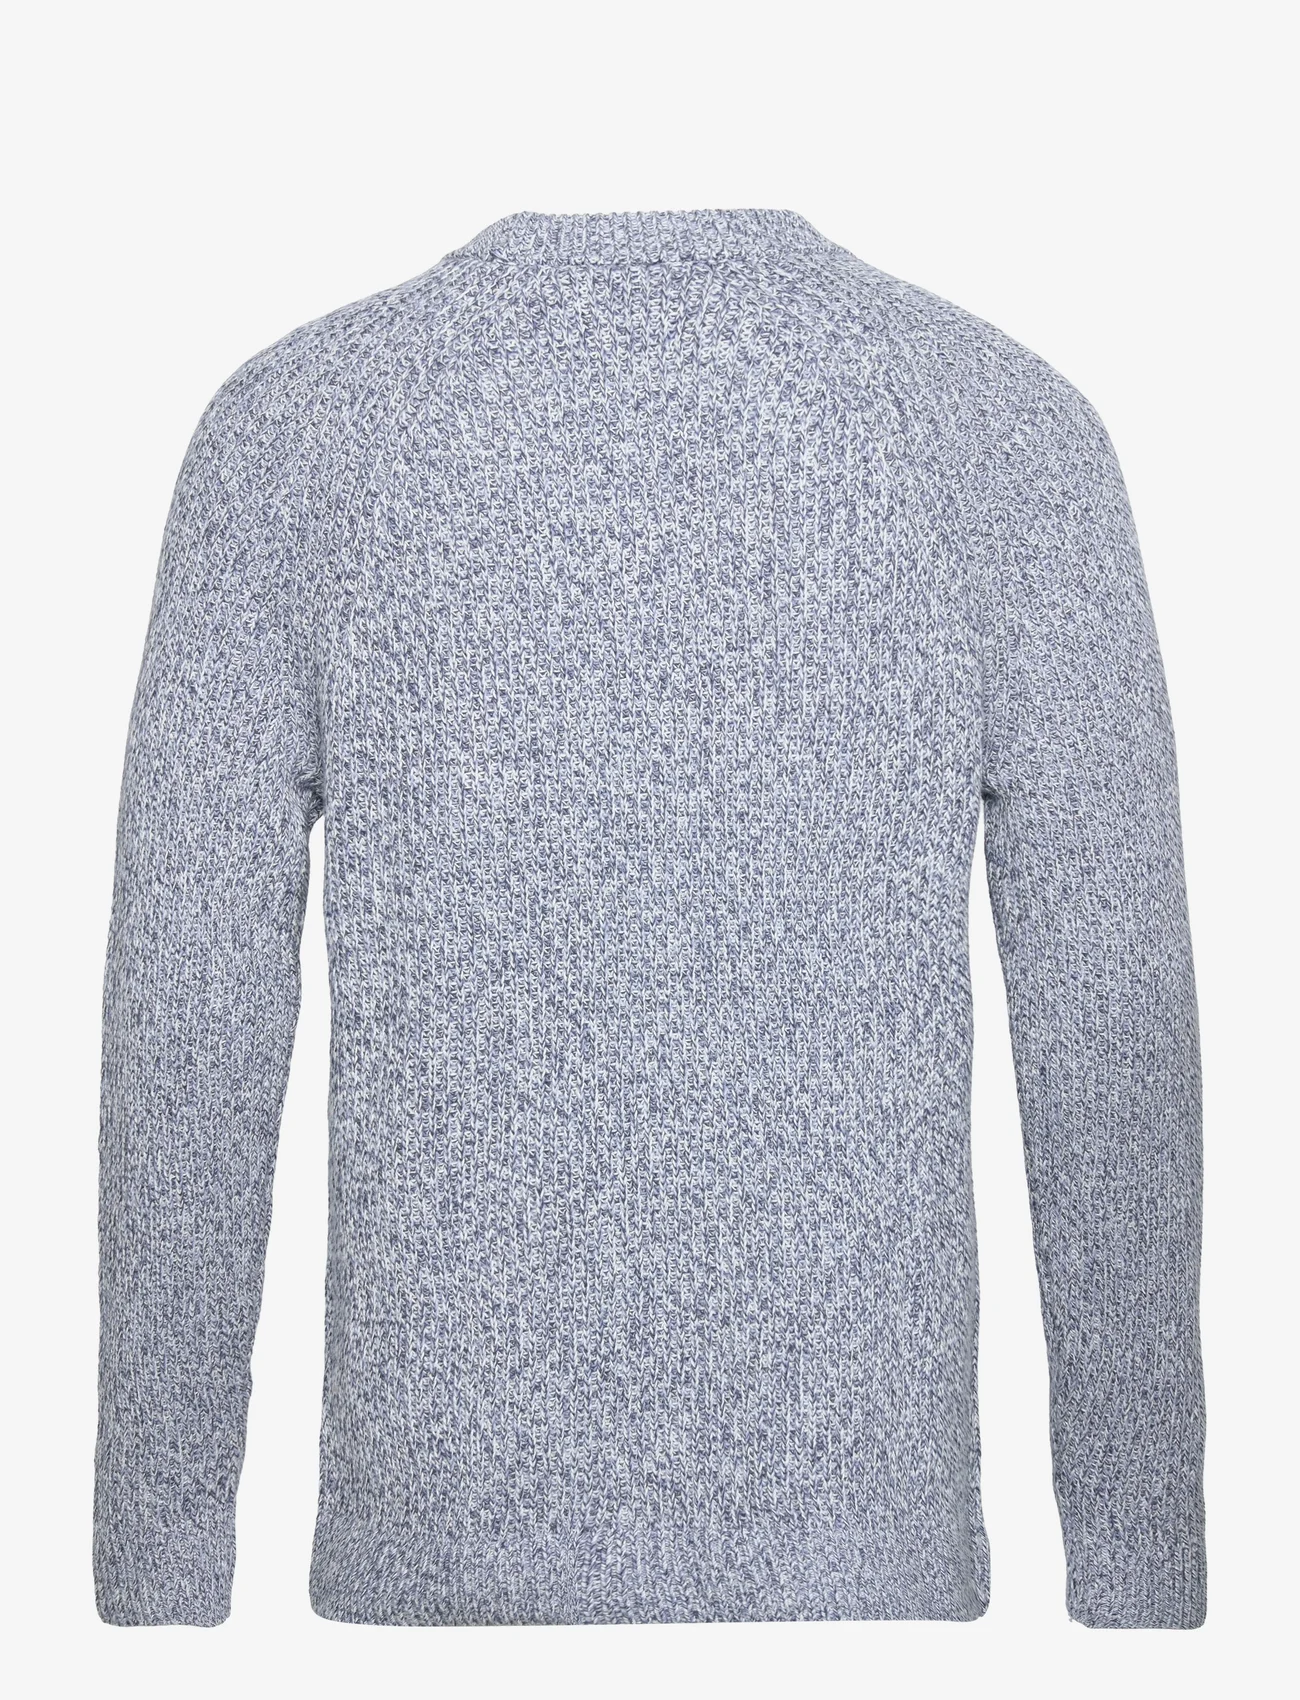 Abercrombie & Fitch - ANF MENS SWEATERS - rundhals - blue marl - 1